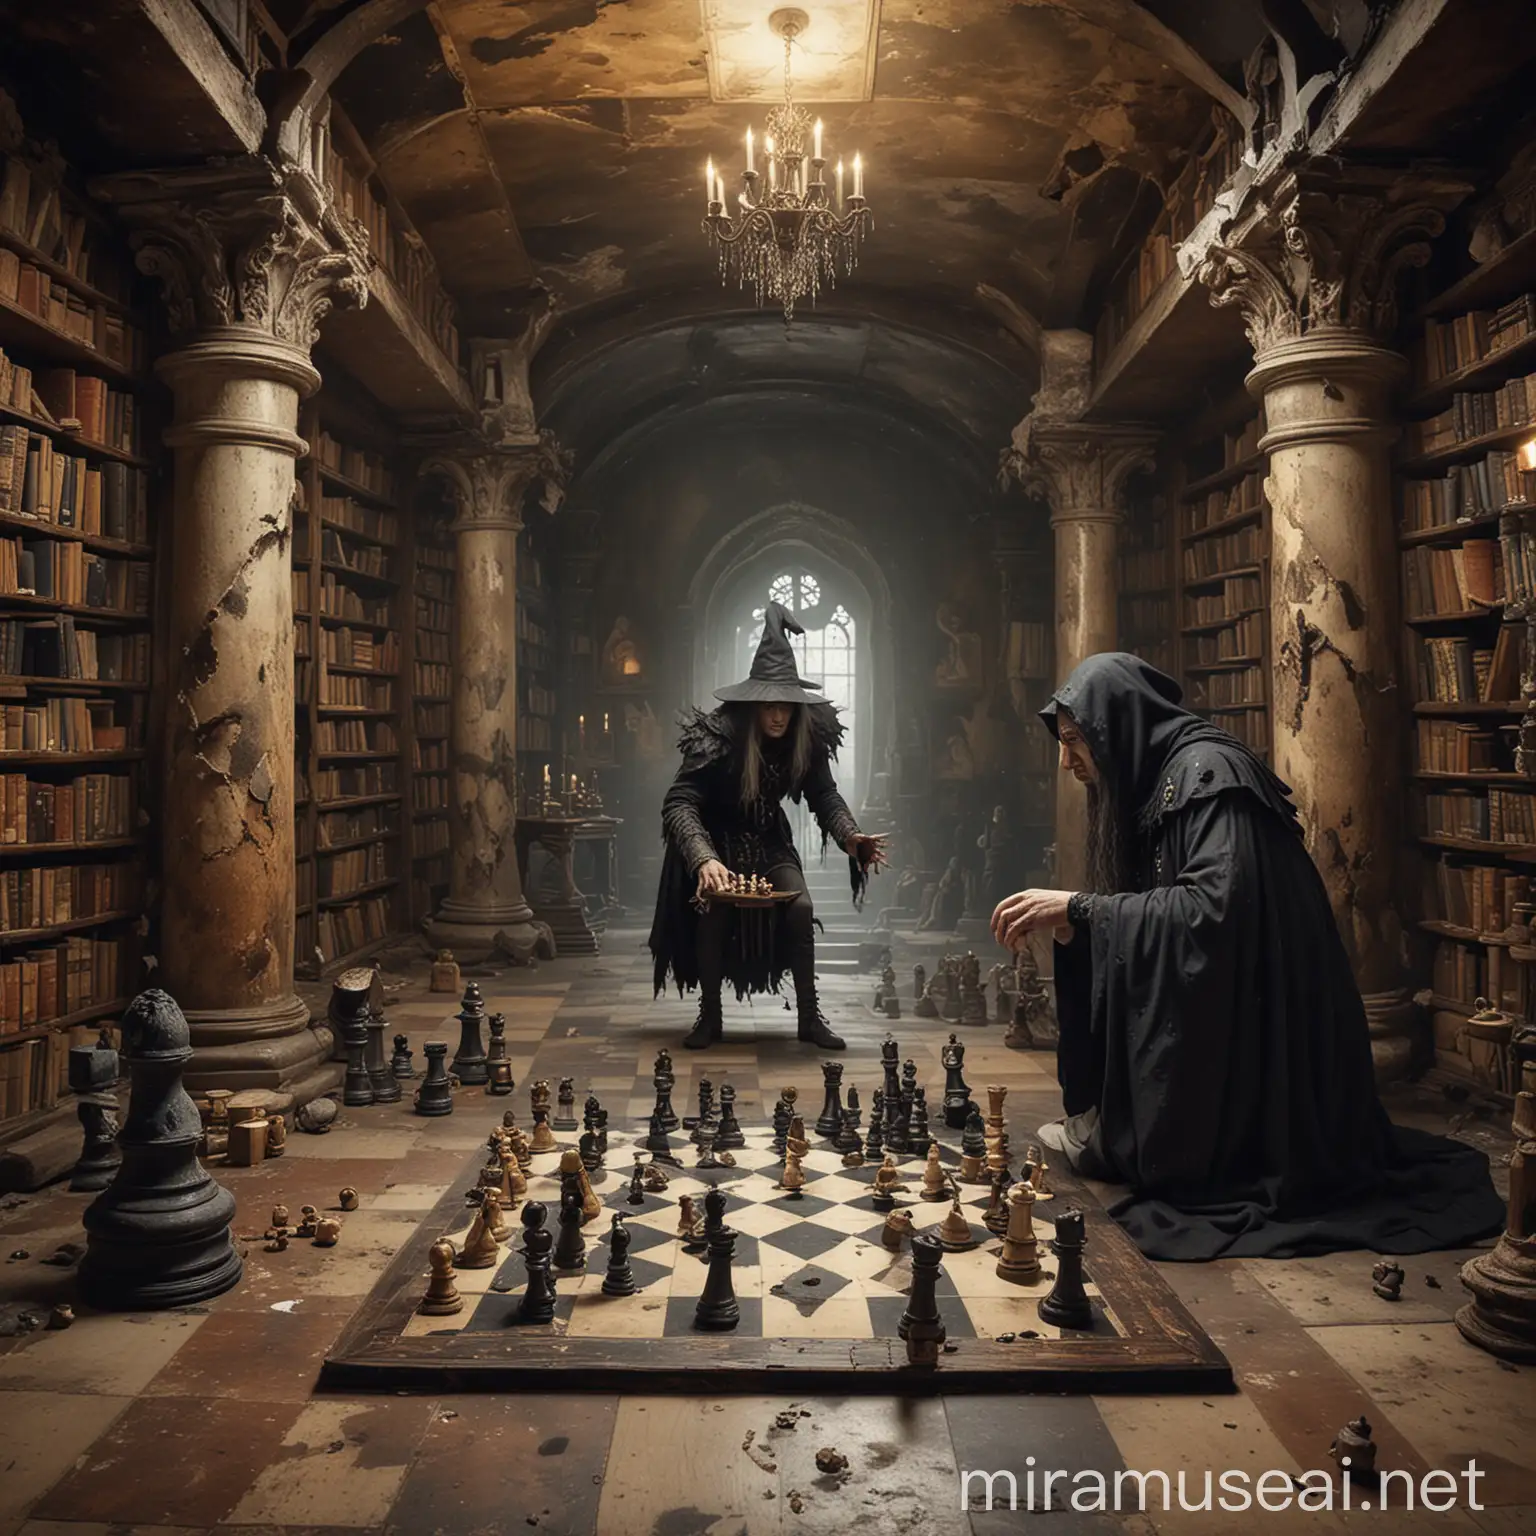 A man is playing chess with one menacing witch inside an old, crumbling library, adorned with chess pieces and paintings

